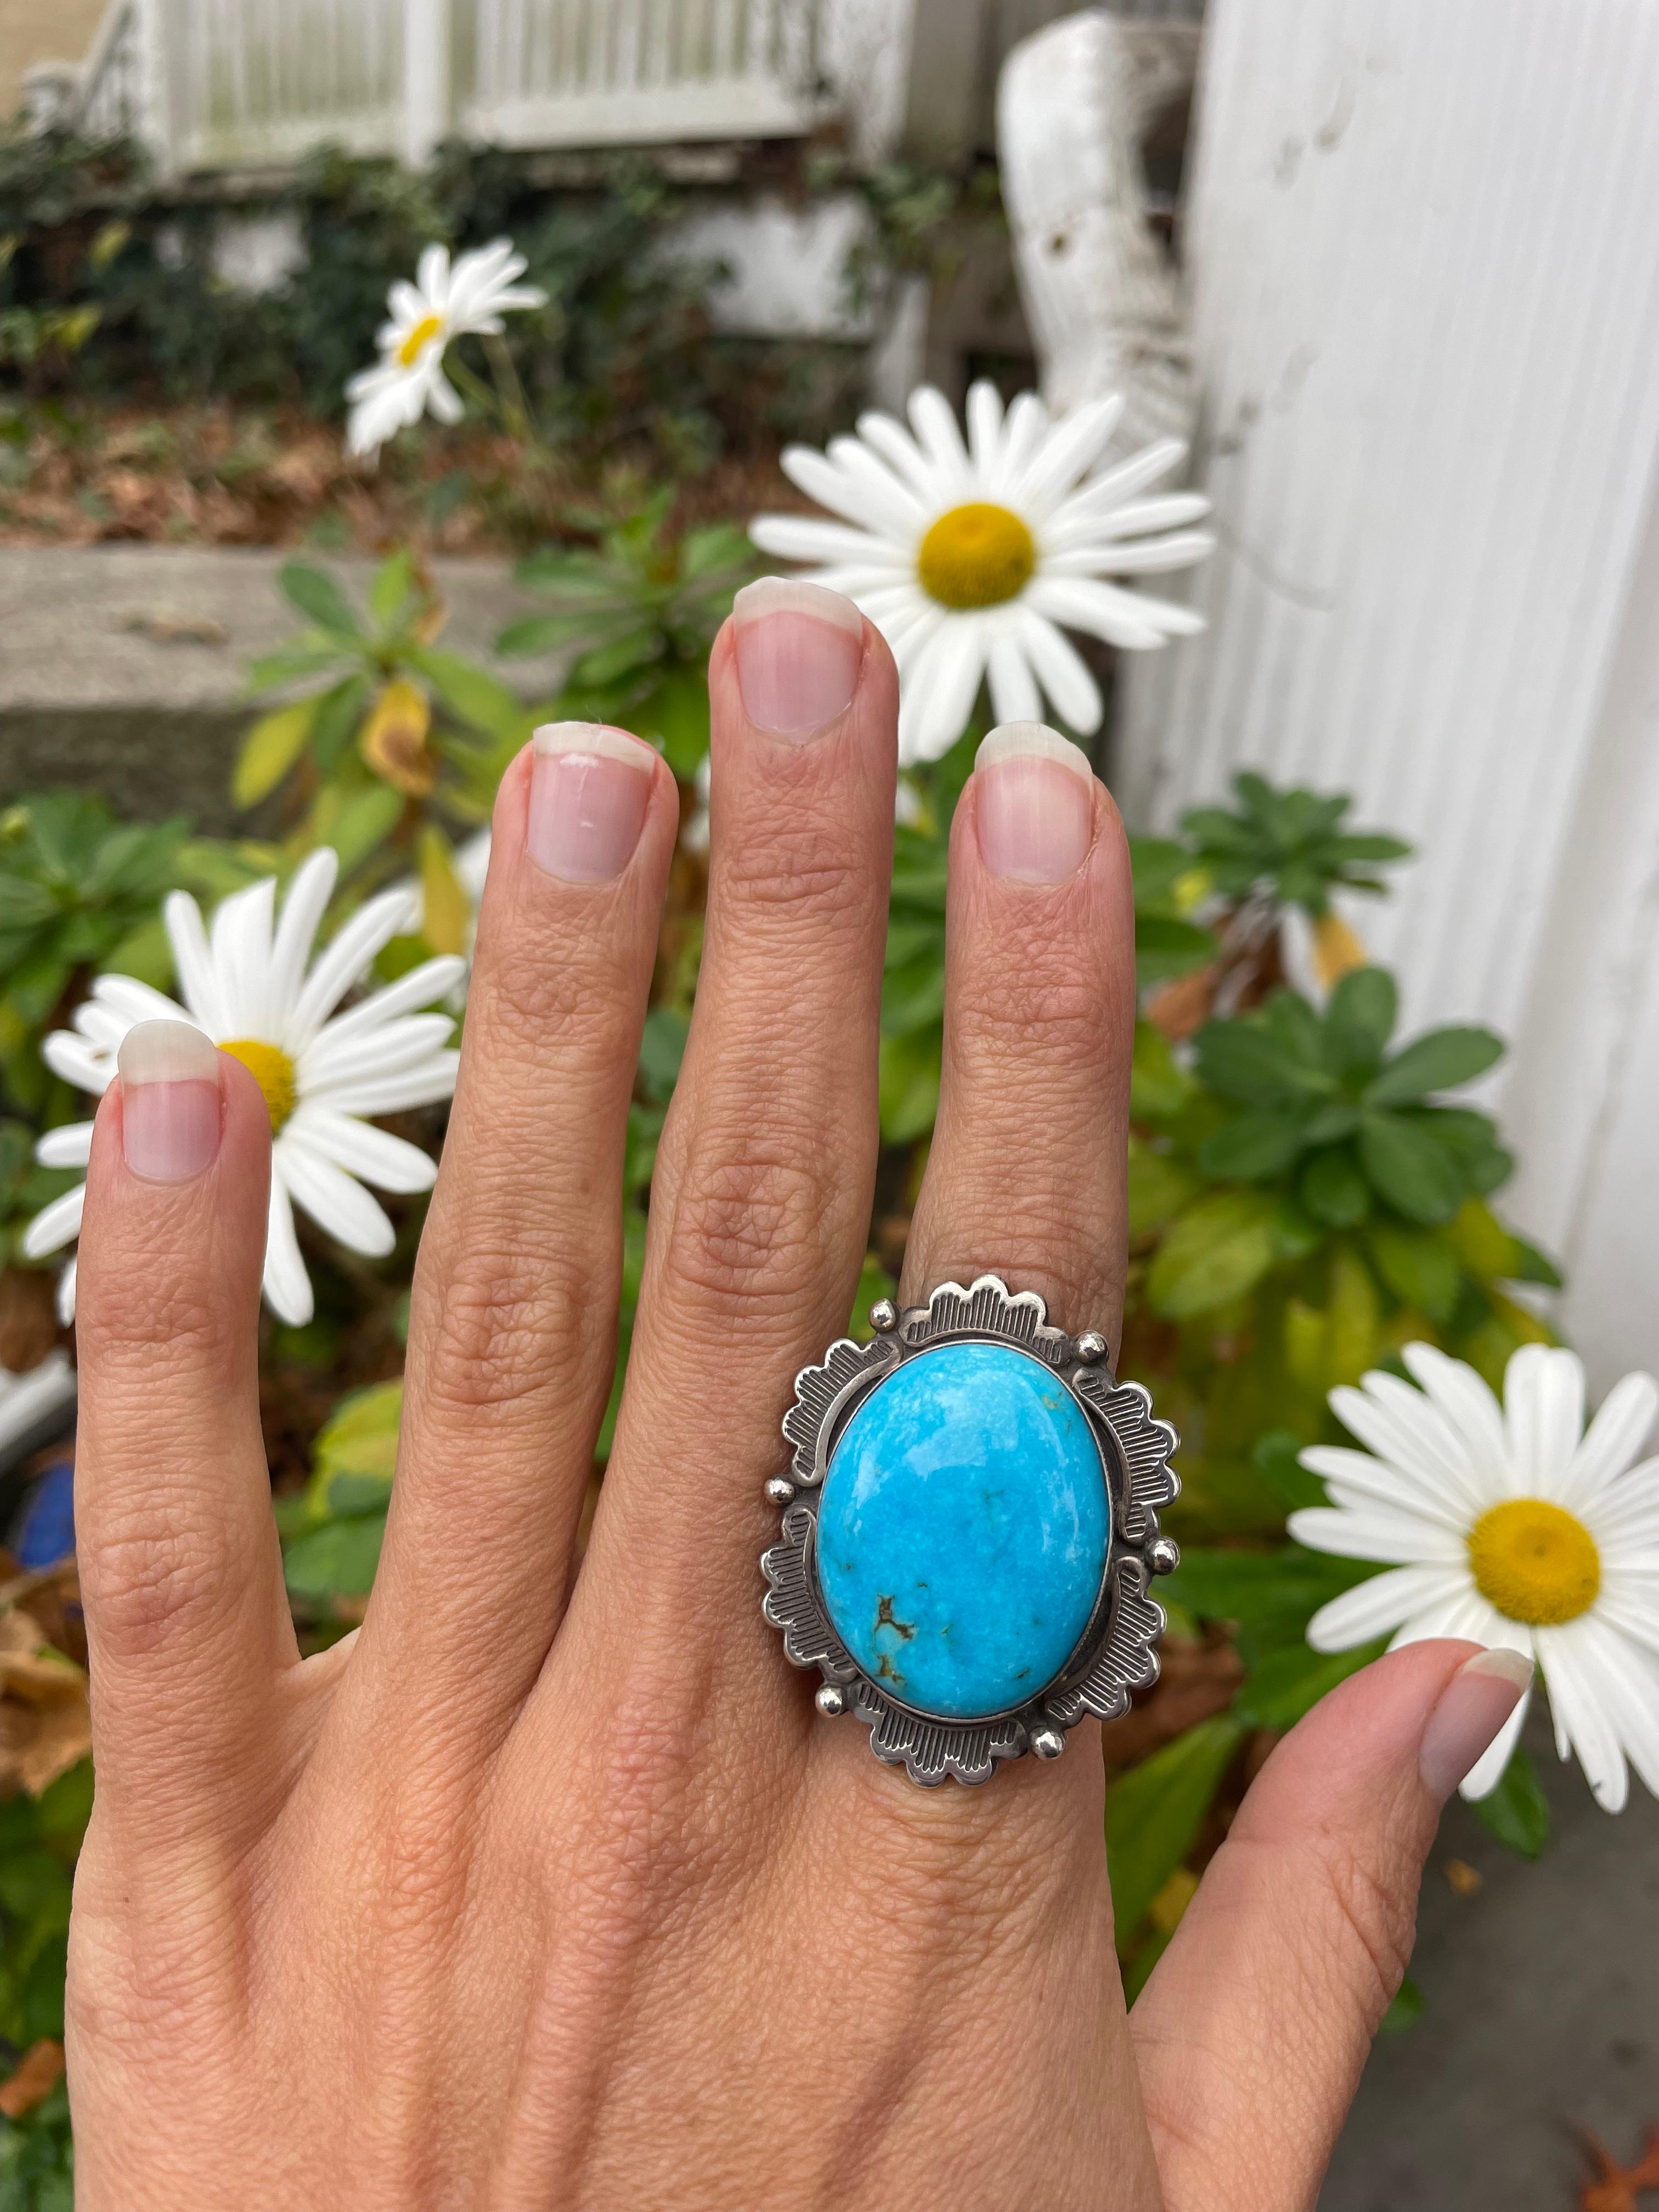 Beautiful Artisan Made Blue Turquoise Sterling Silver Native American Ring

A beautiful bright blue artisan made turquiose sterling silver ring. 

Stamped 